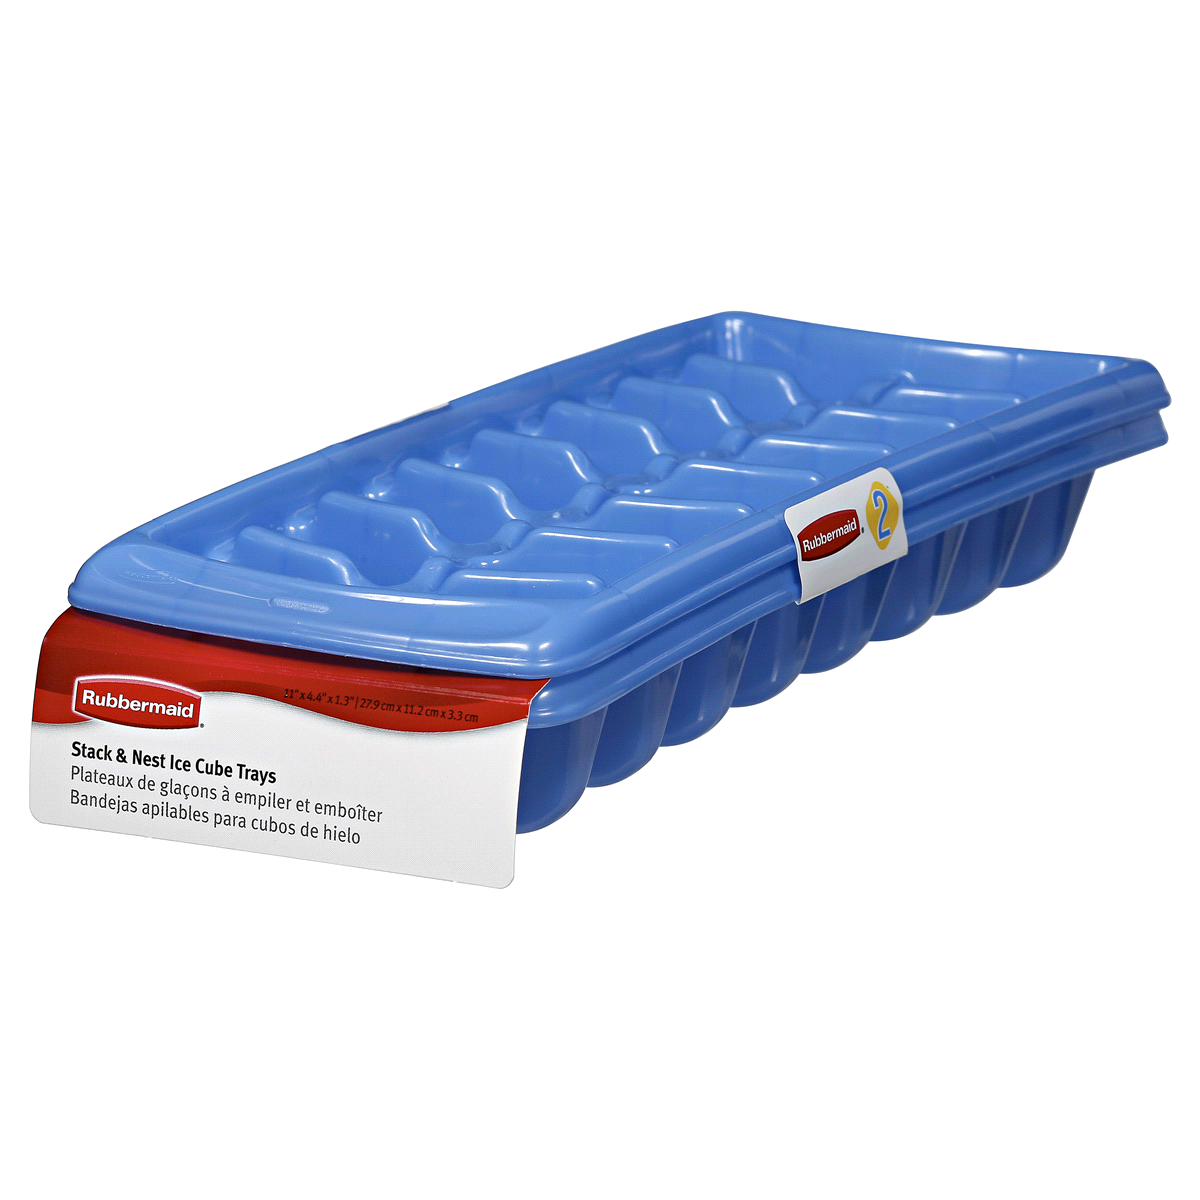 Rubbermaid Stack Nest Ice Cube Tray Periwinkle 2 ct